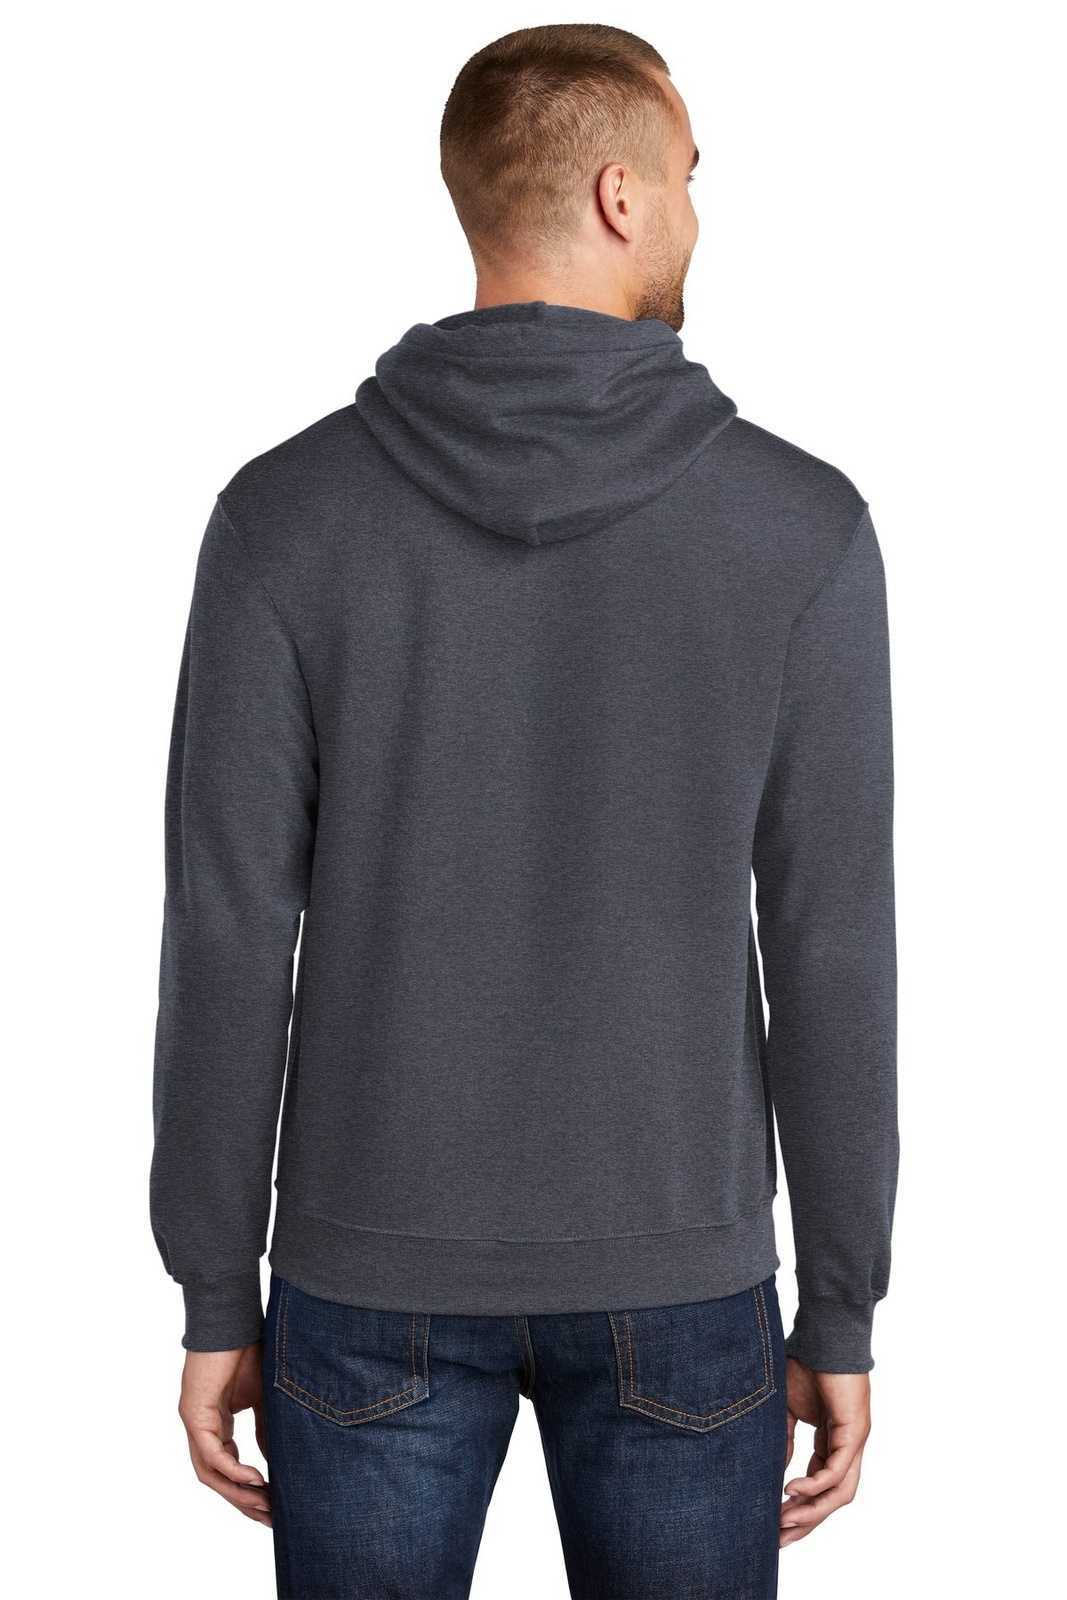 Port &amp; Company PC78HT Tall Core Fleece Pullover Hooded Sweatshirt - Heather Navy - HIT a Double - 2